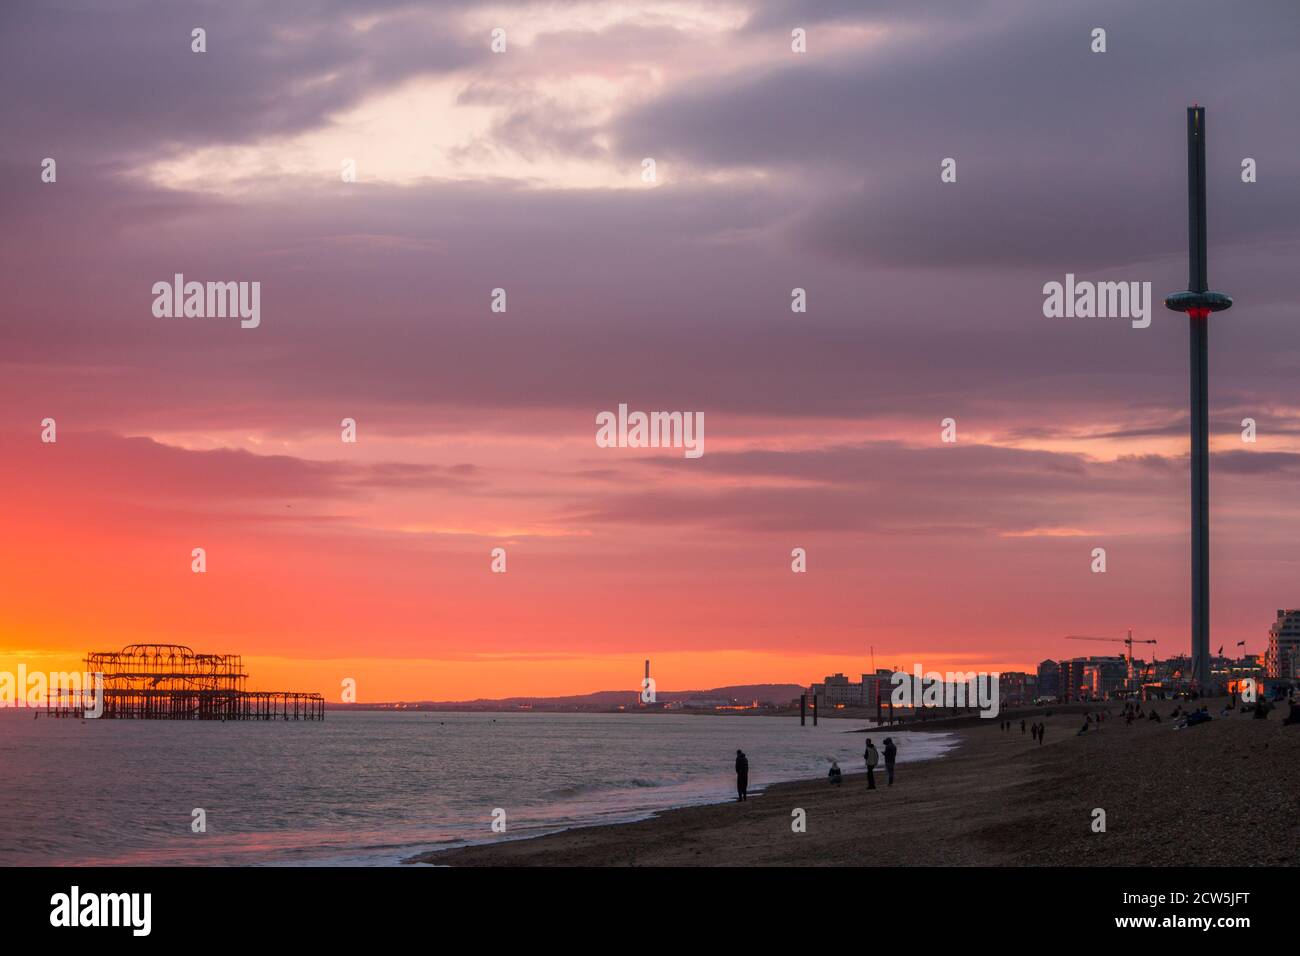 Brighton, East Sussex, England, UK. 27 September 2020 Sunset adjacent to the west pier, which was damaged in an arson attack in 2003, also visible is the British Airways i360 ©Sarah Mott / Alamy Live News ©Sarah Mott / Alamy Live News ©Sarah Mott / Alamy Live News Stock Photo